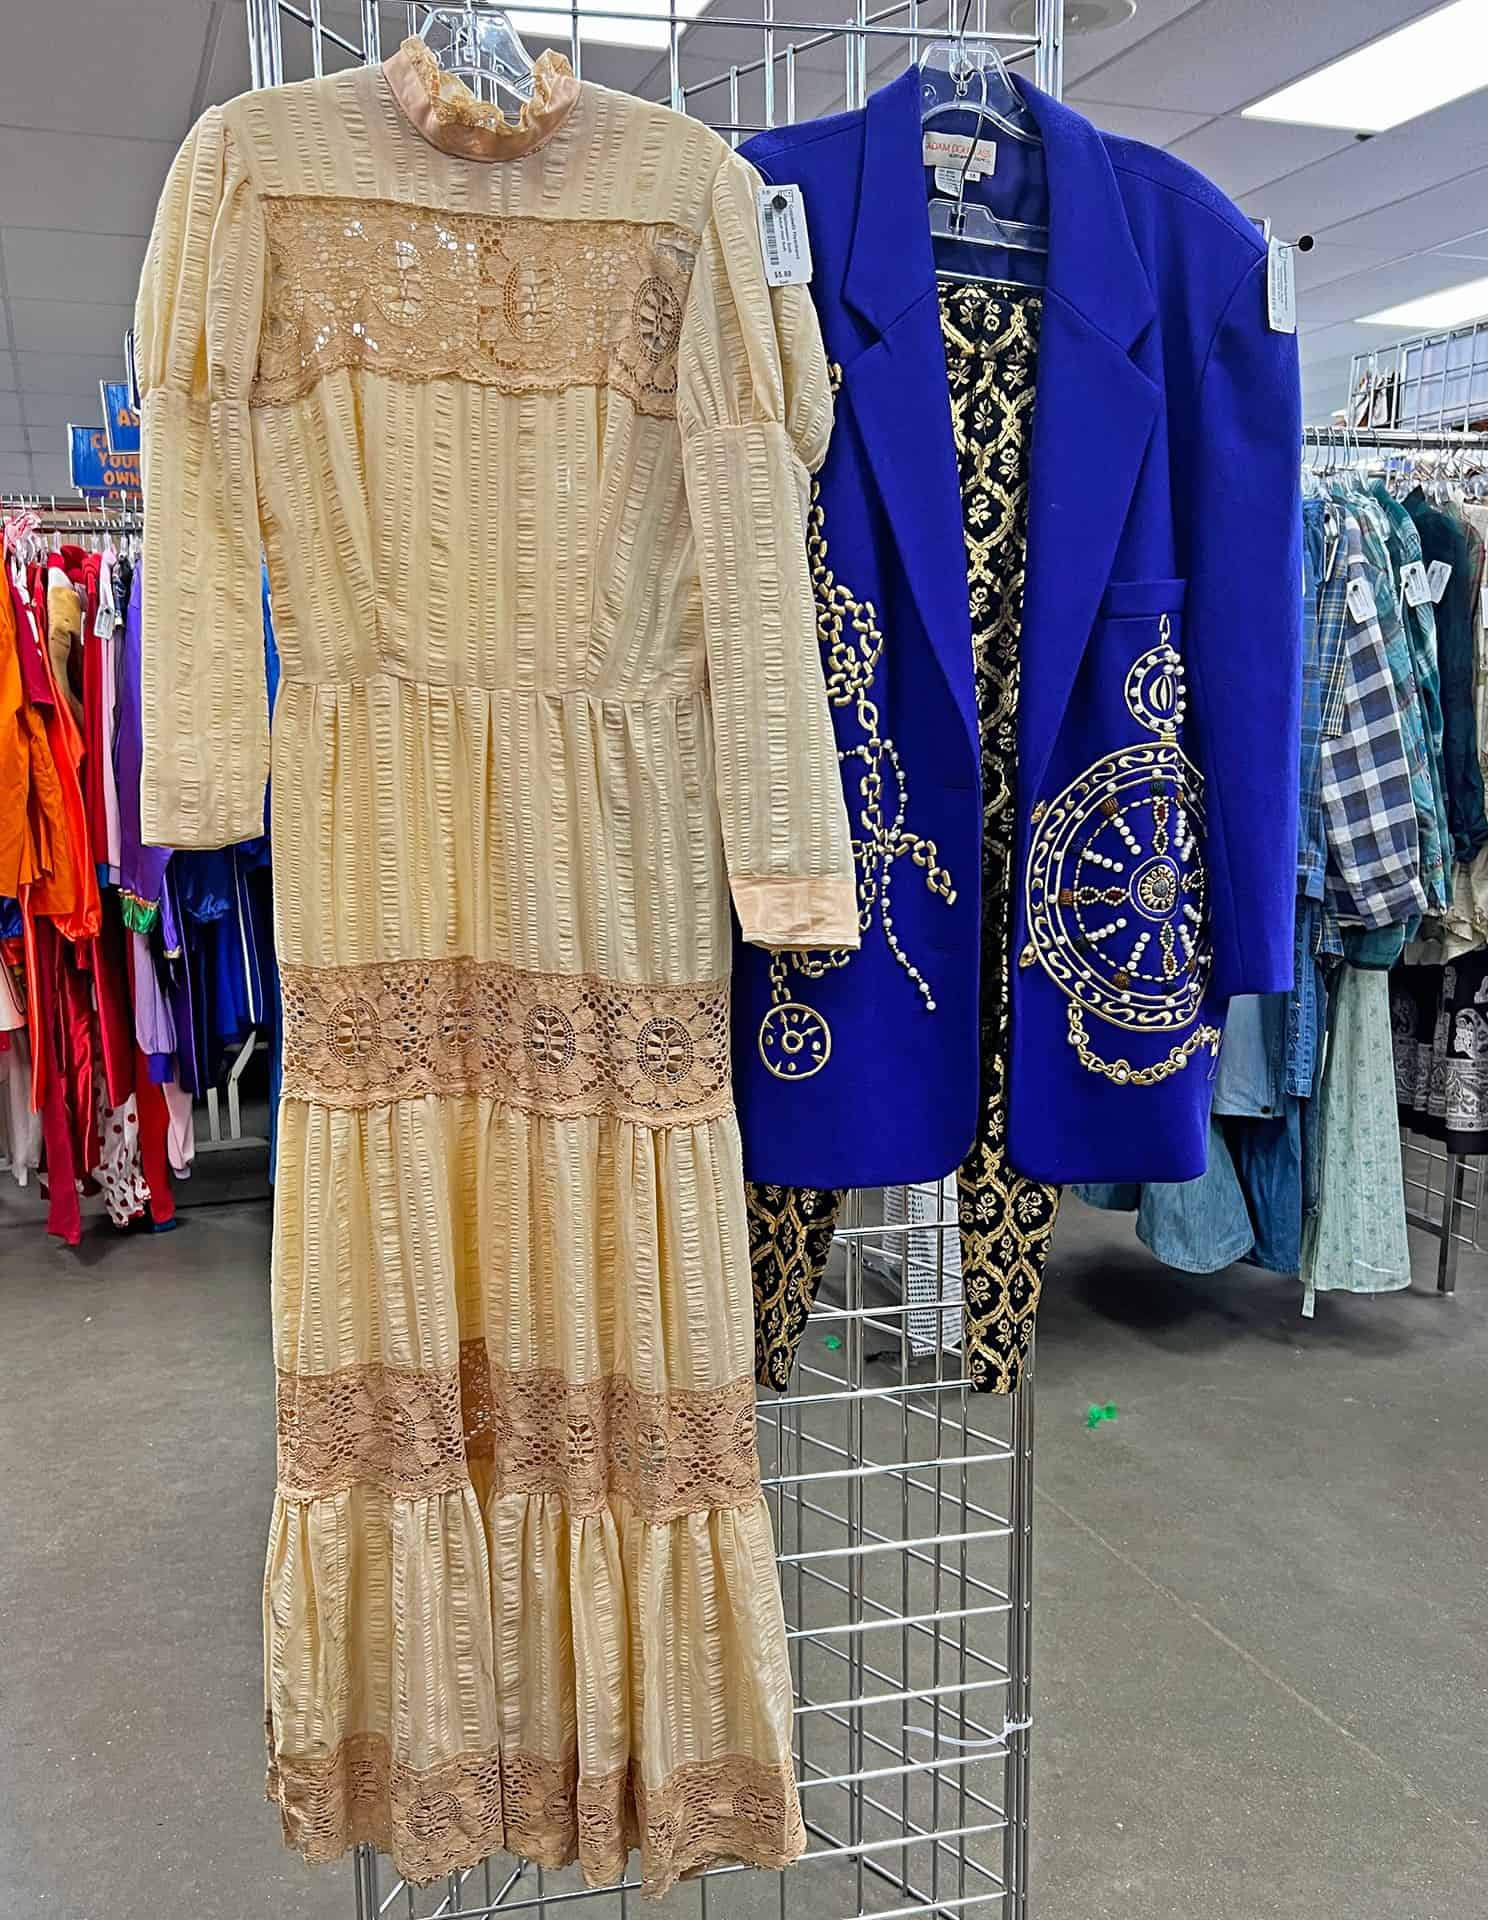 Costumes from Halloween Headquarters at Goodwill